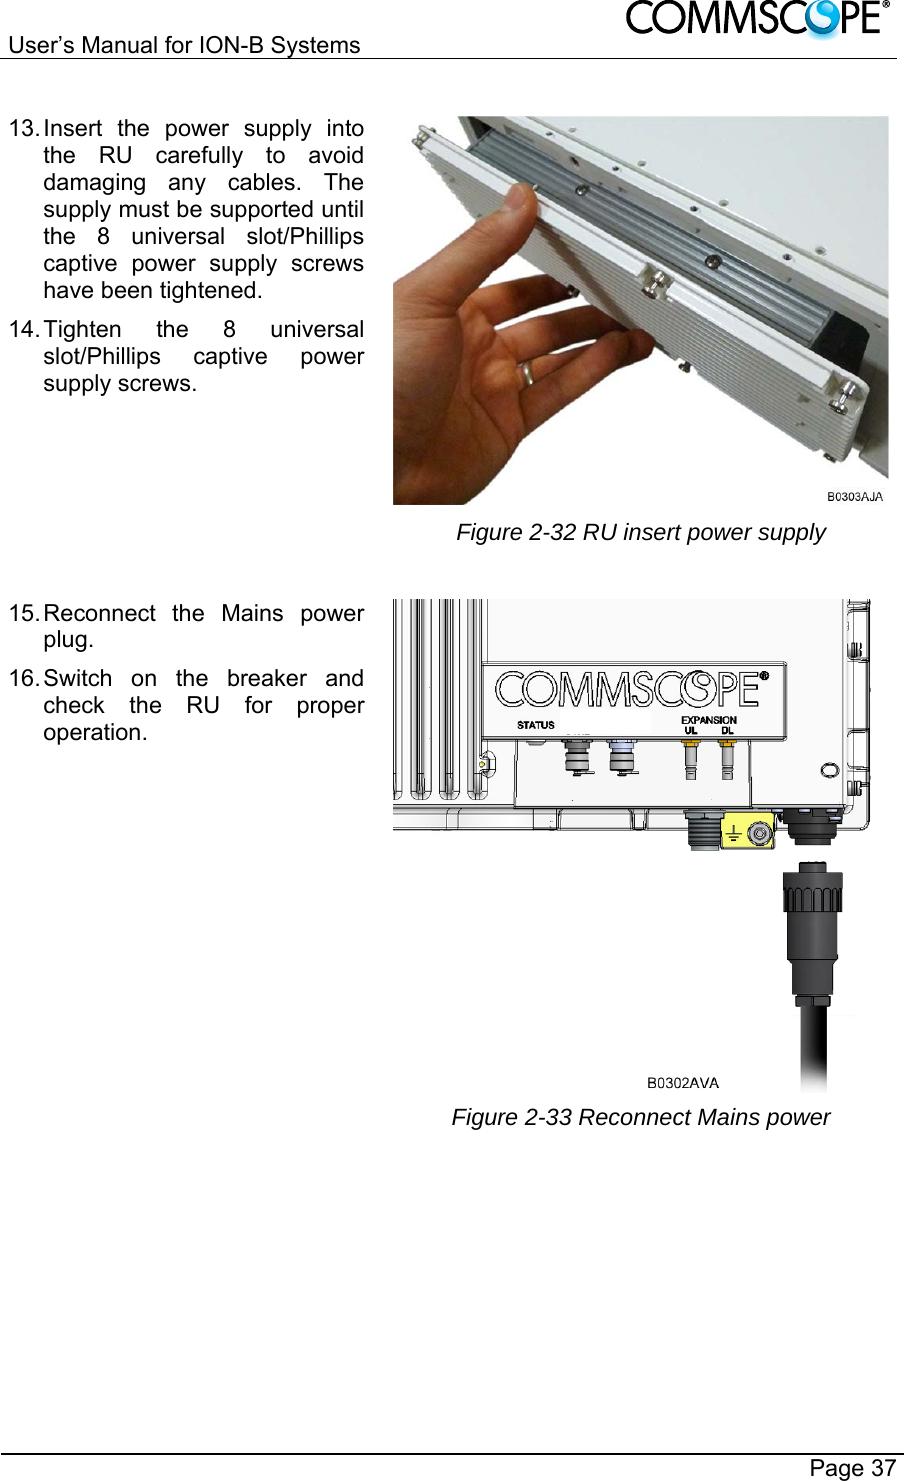 User’s Manual for ION-B Systems       Page 37 13. Insert the power supply into the RU carefully to avoid damaging any cables. The supply must be supported until the 8 universal slot/Phillips captive power supply screws have been tightened. 14. Tighten the 8 universal slot/Phillips captive power supply screws.  Figure 2-32 RU insert power supply 15. Reconnect the Mains power plug. 16. Switch on the breaker and check the RU for proper operation.  Figure 2-33 Reconnect Mains power  